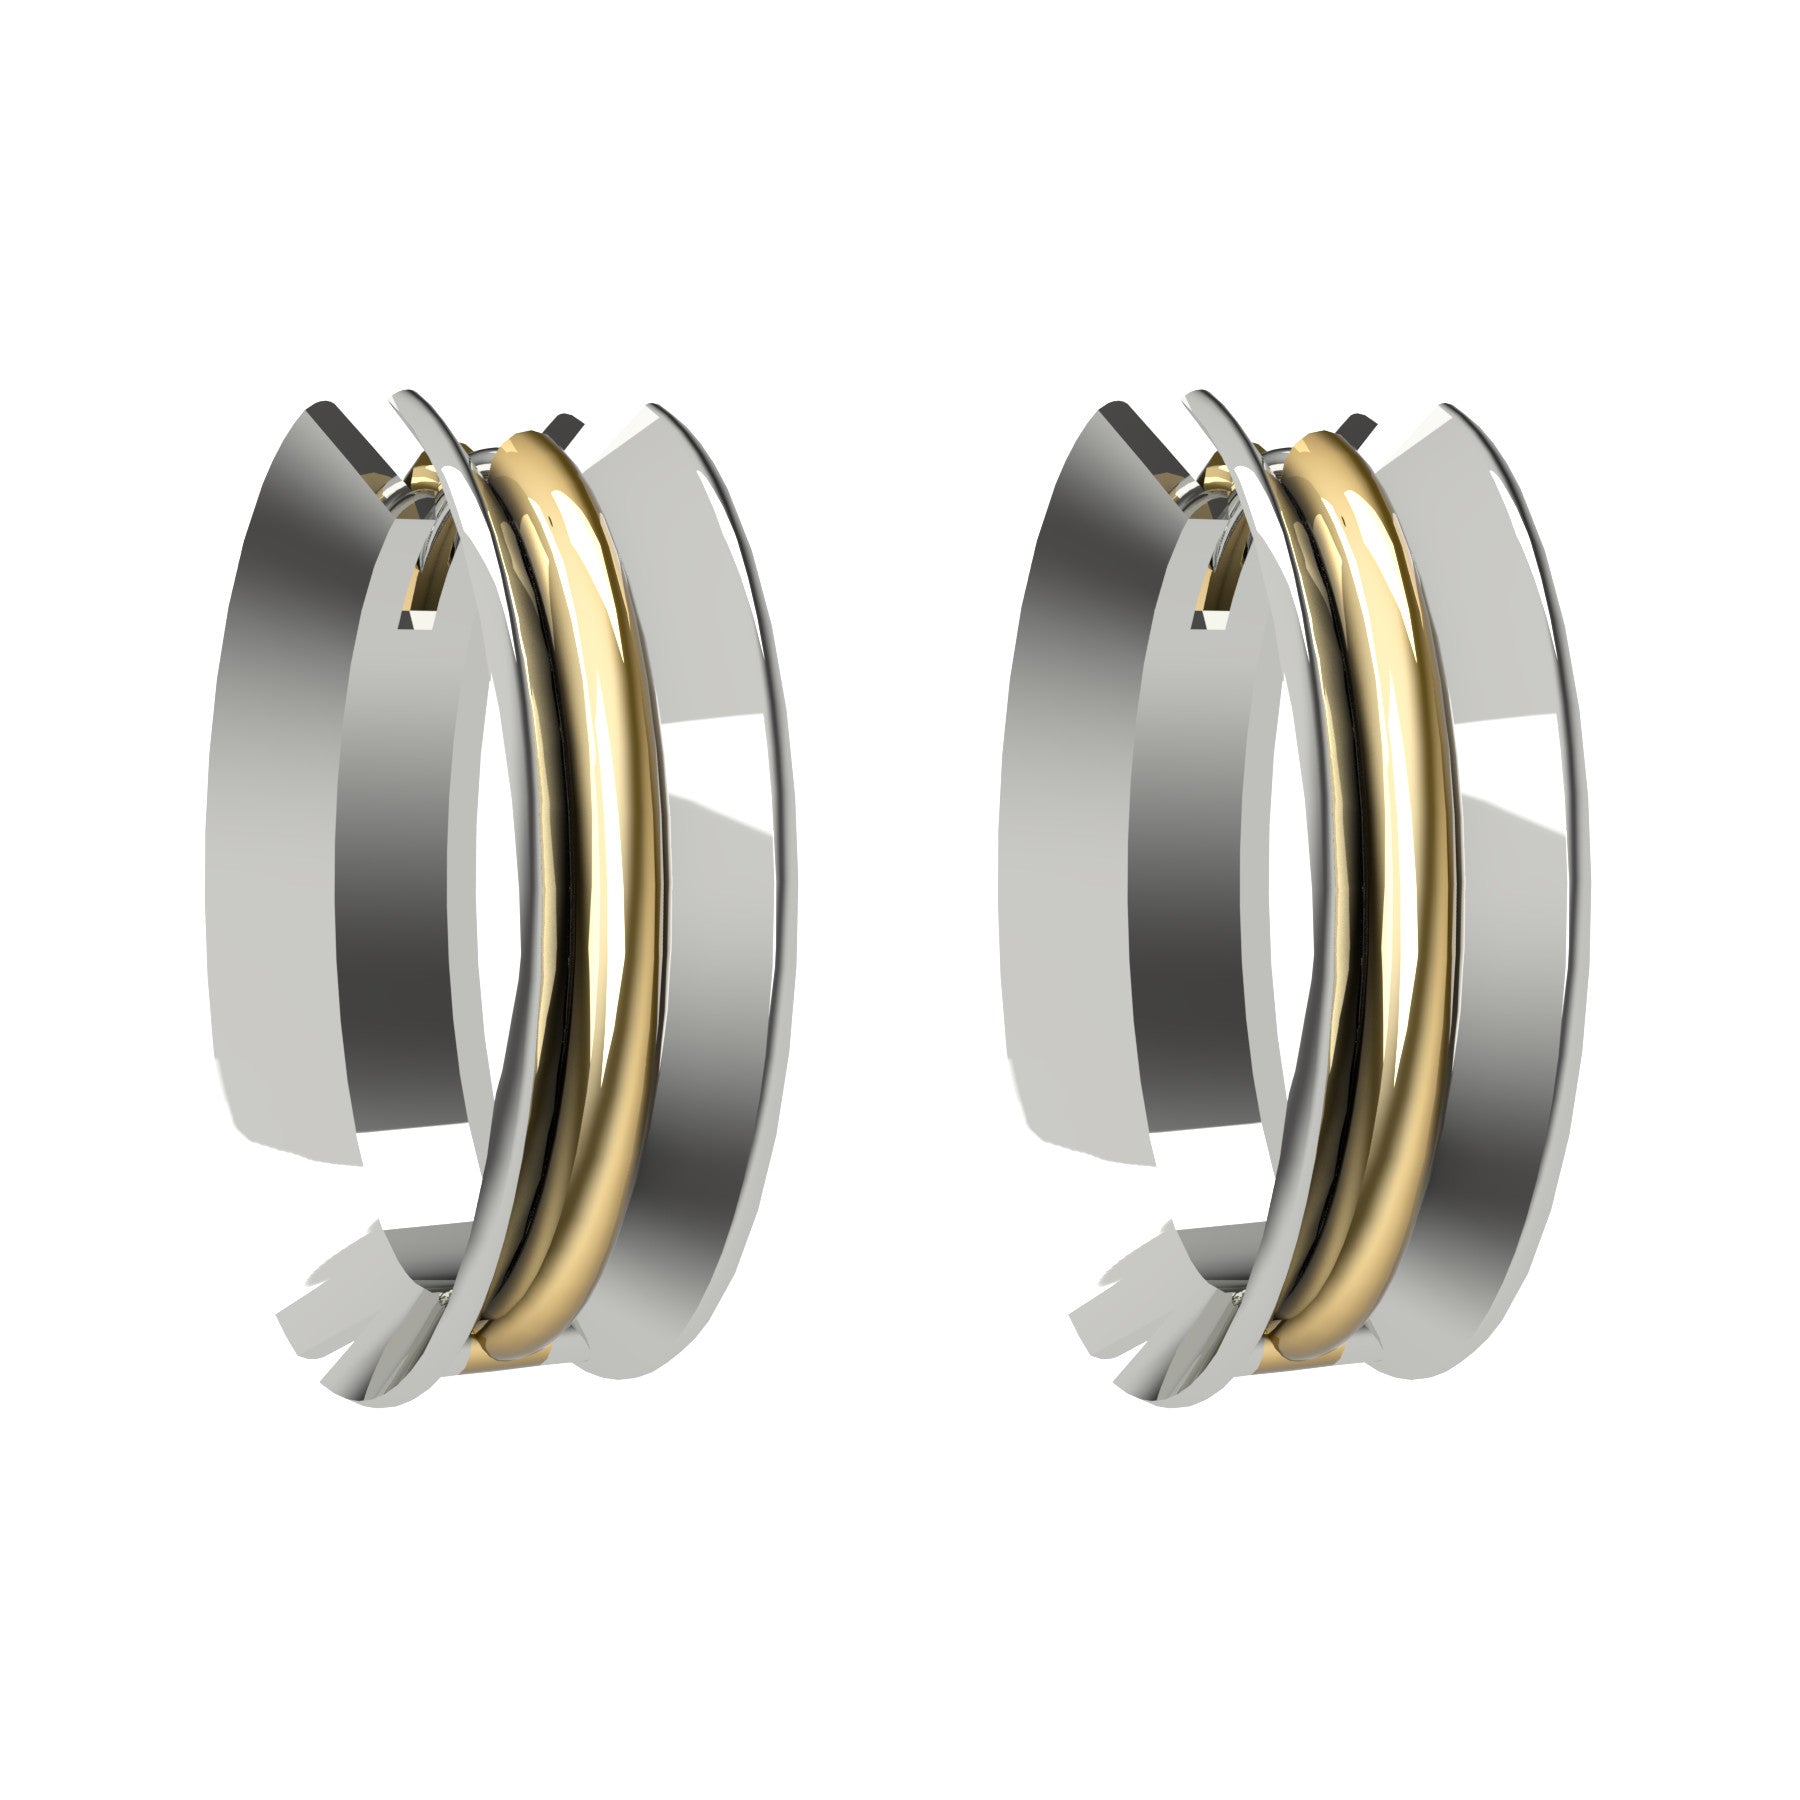 bobo oval earrings, 18 K white and yellow gold, weight about 10,9 g (0.38 oz), size 23,5x13,8x8 mm 